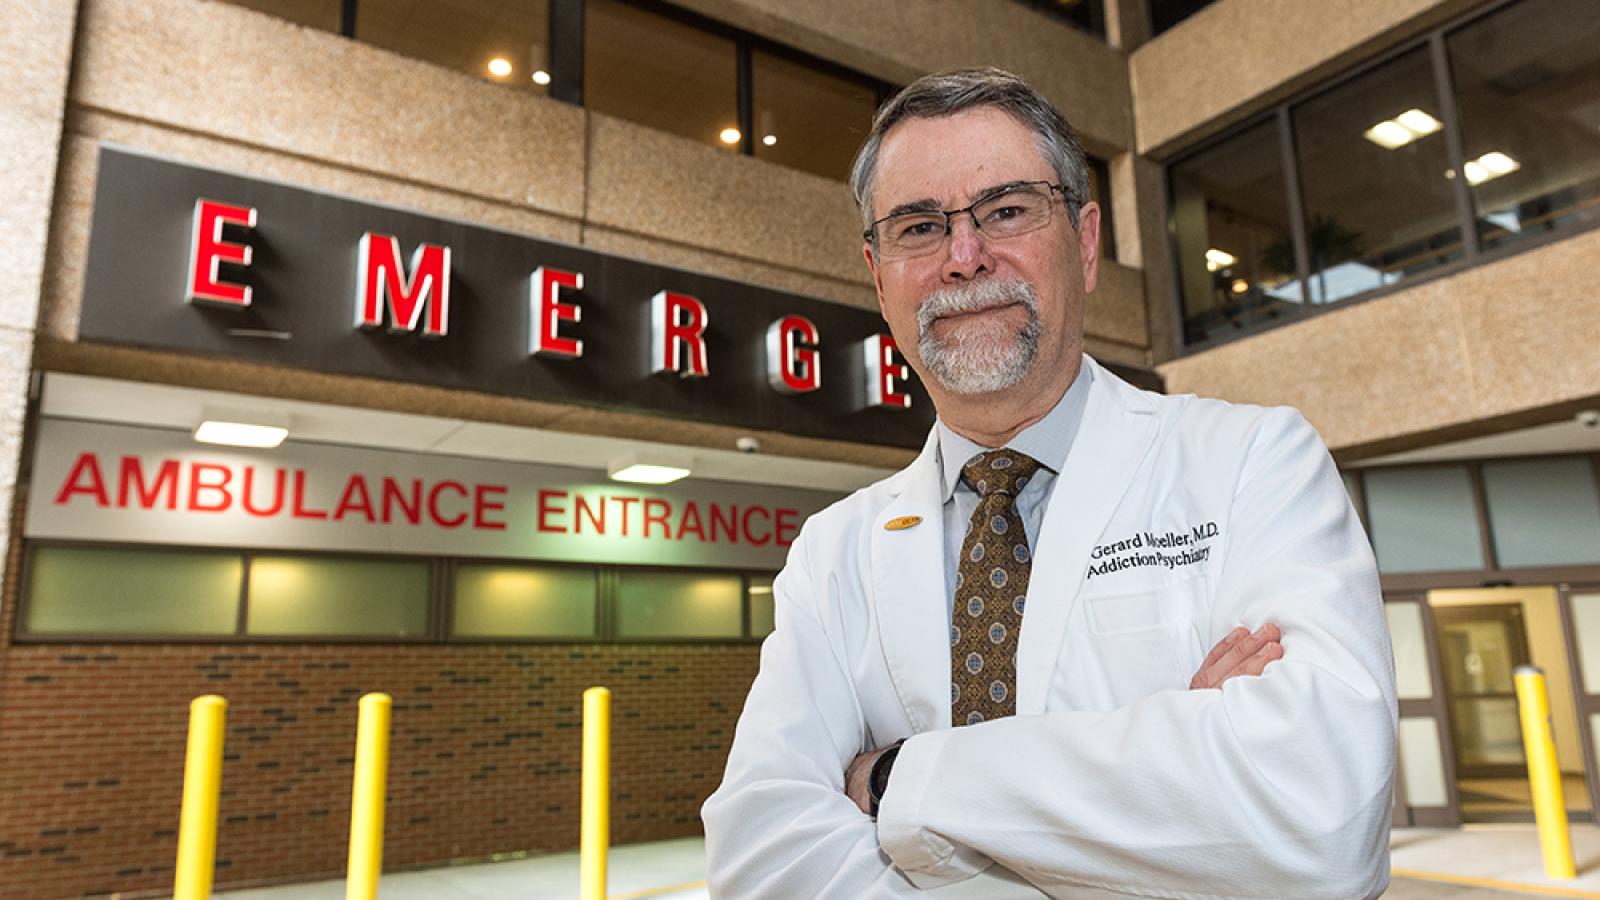 F. Gerard “Gerry” Moeller, M.D., director of VCU’s Wright Center for Clinical and Transitional Research who also serves as the university’s associate vice president for clinical research and leader of the VCU Institute for Drug and Alcohol Studies.